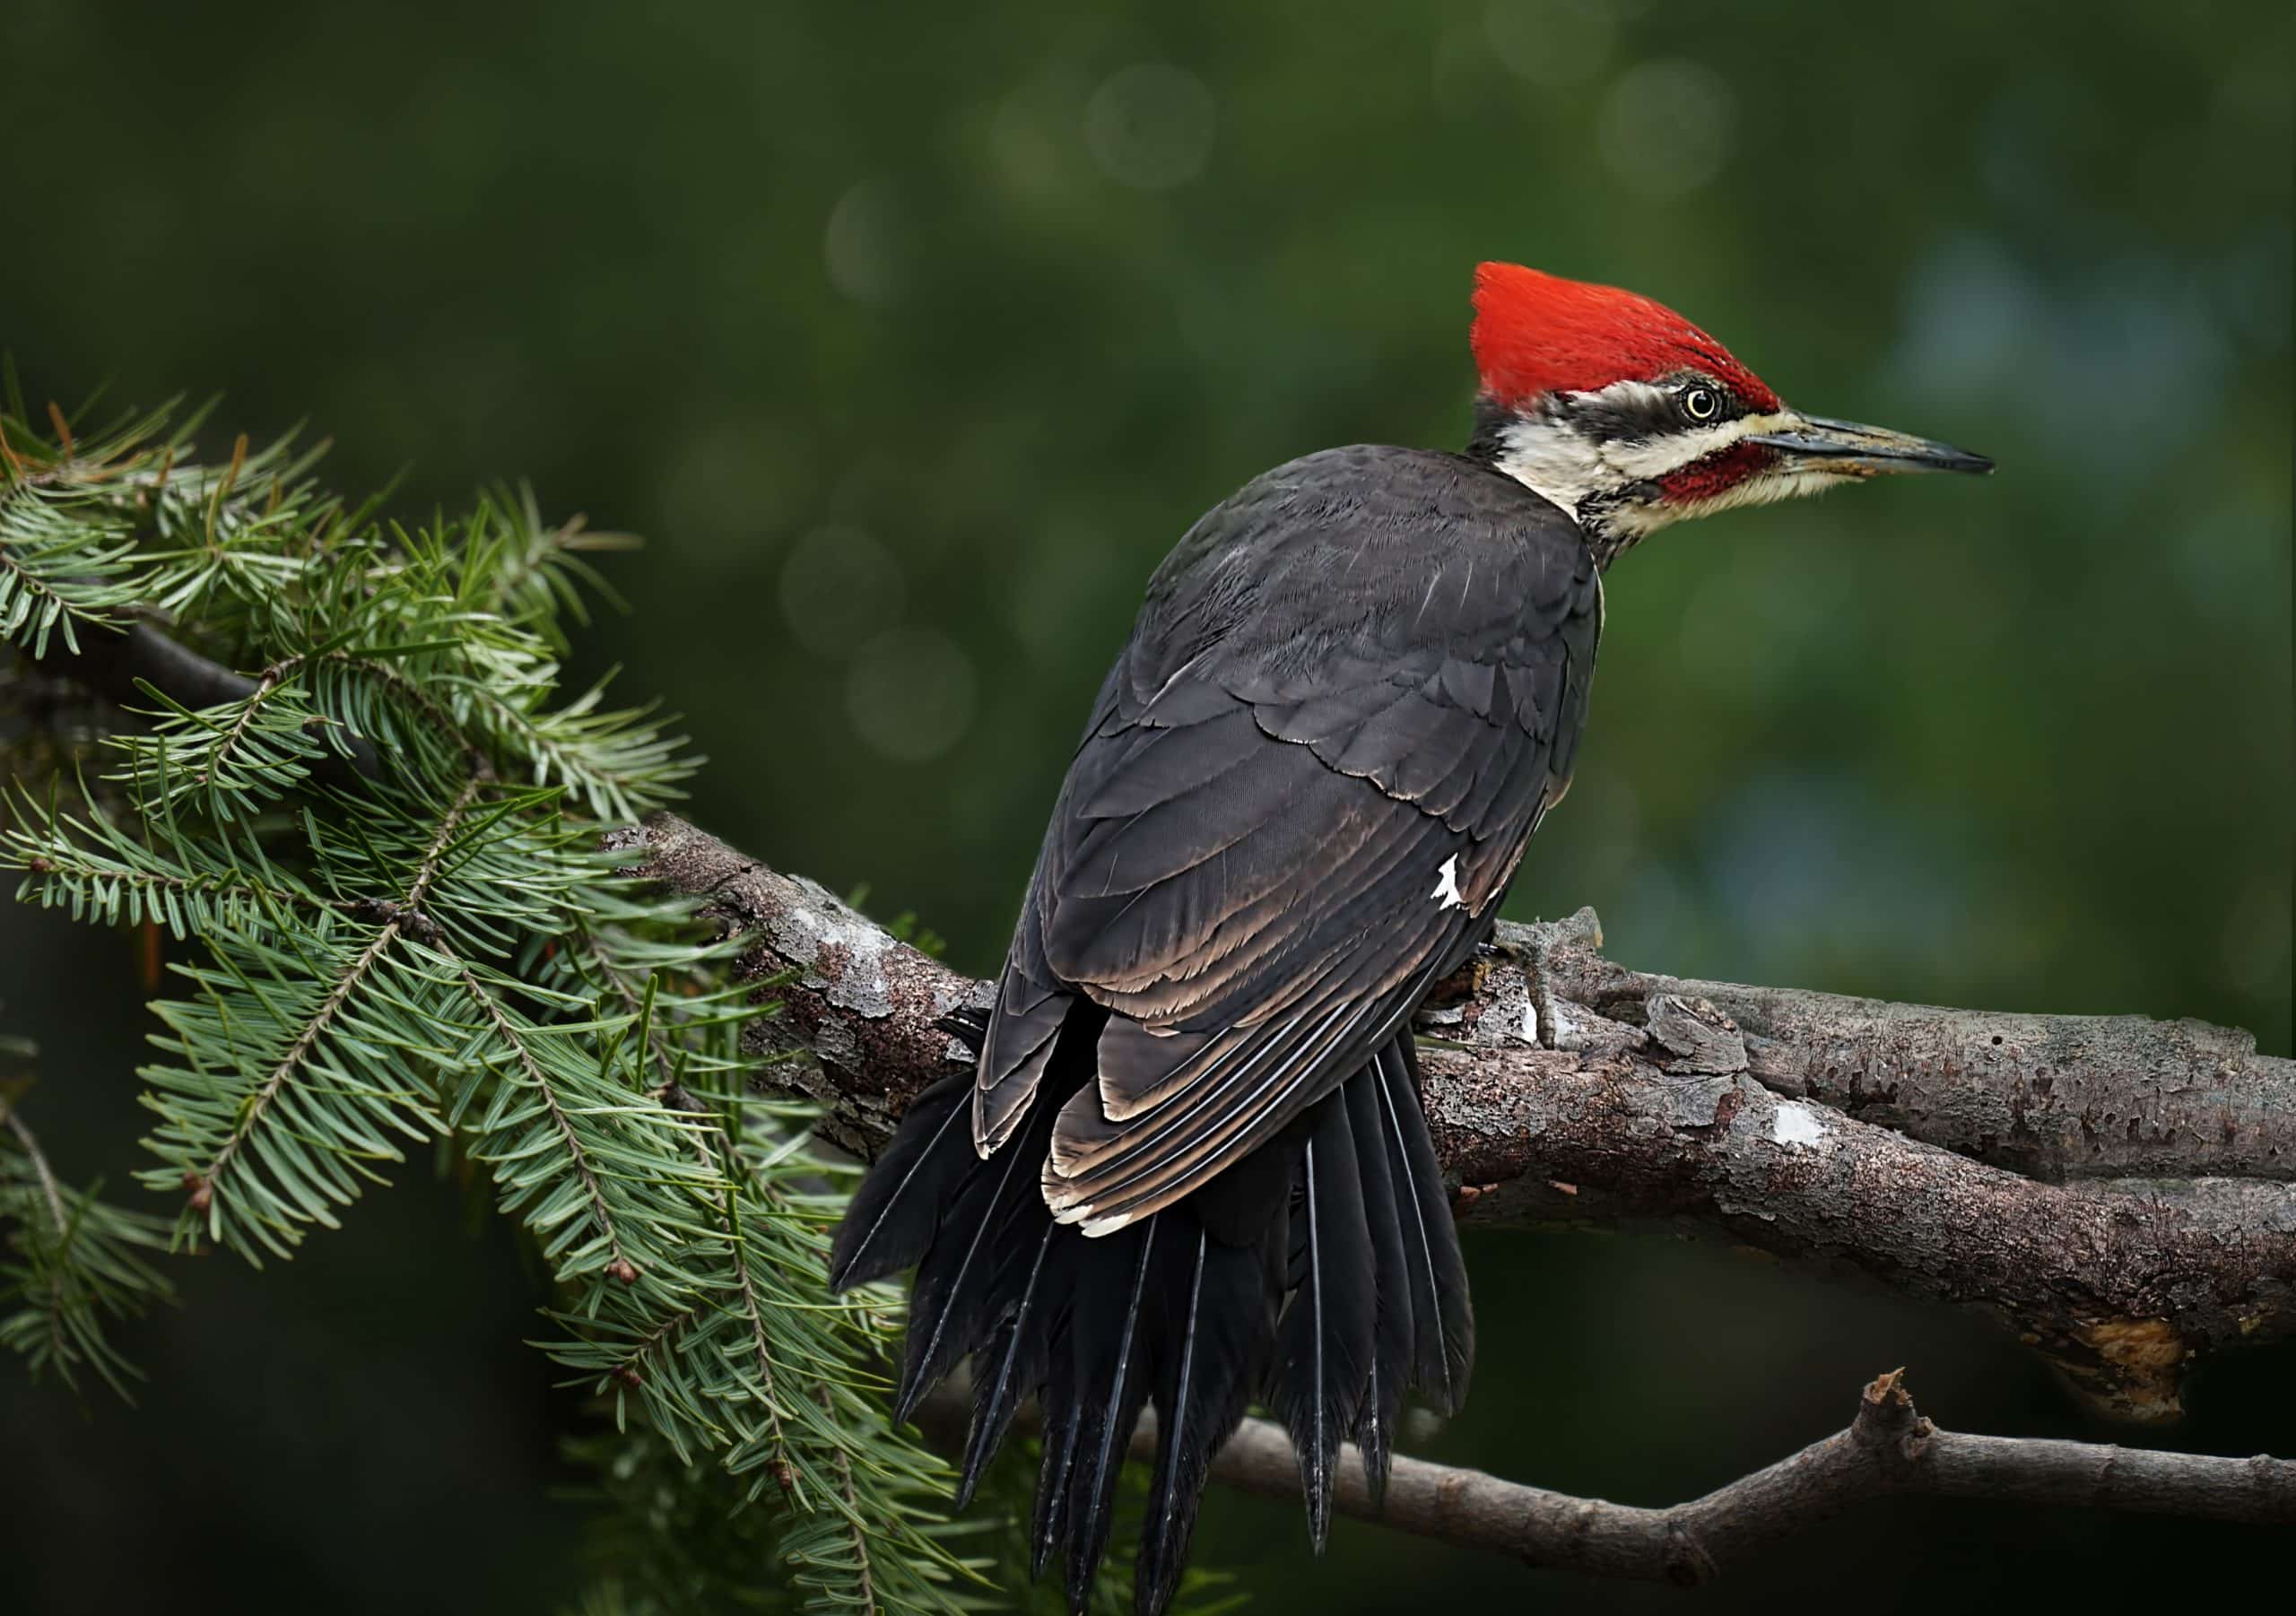 Are Woodpeckers Nocturnal or Diurnal Birds